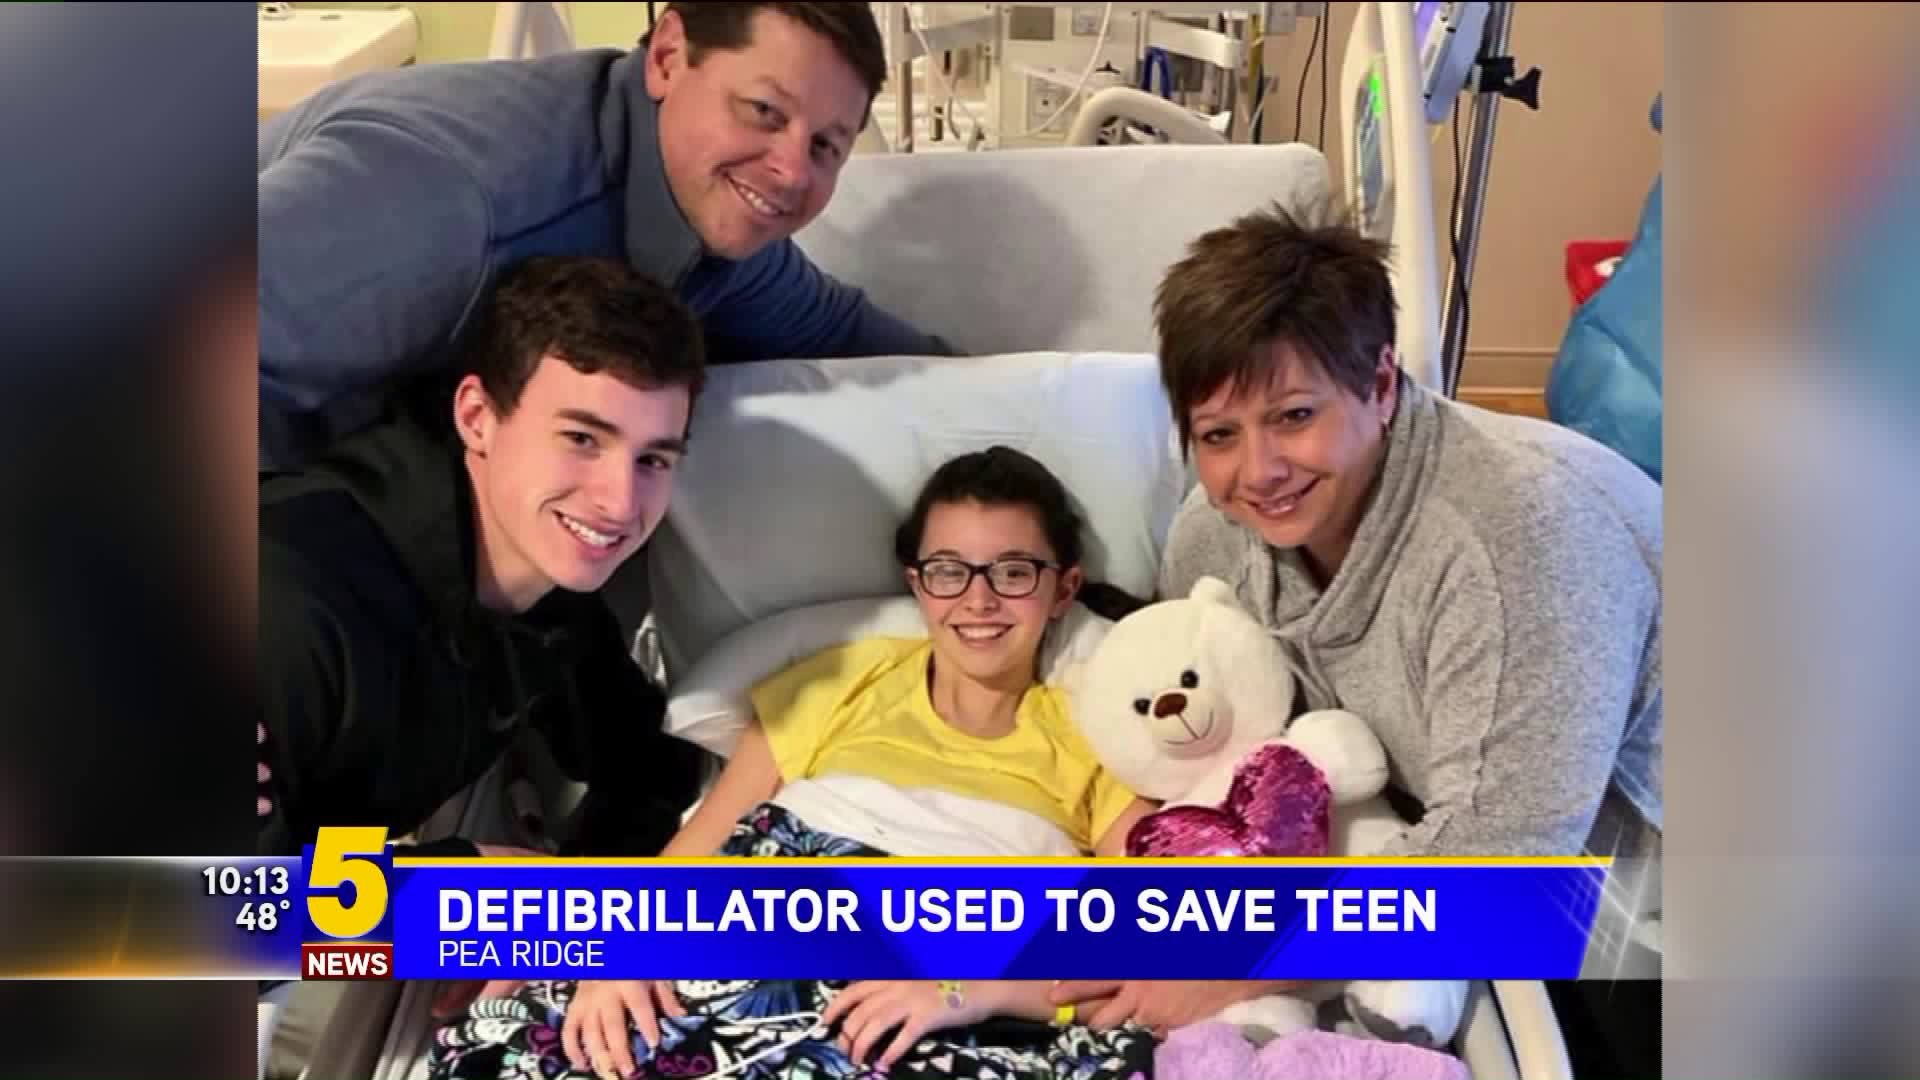 Defibrillator Used To Save Teen